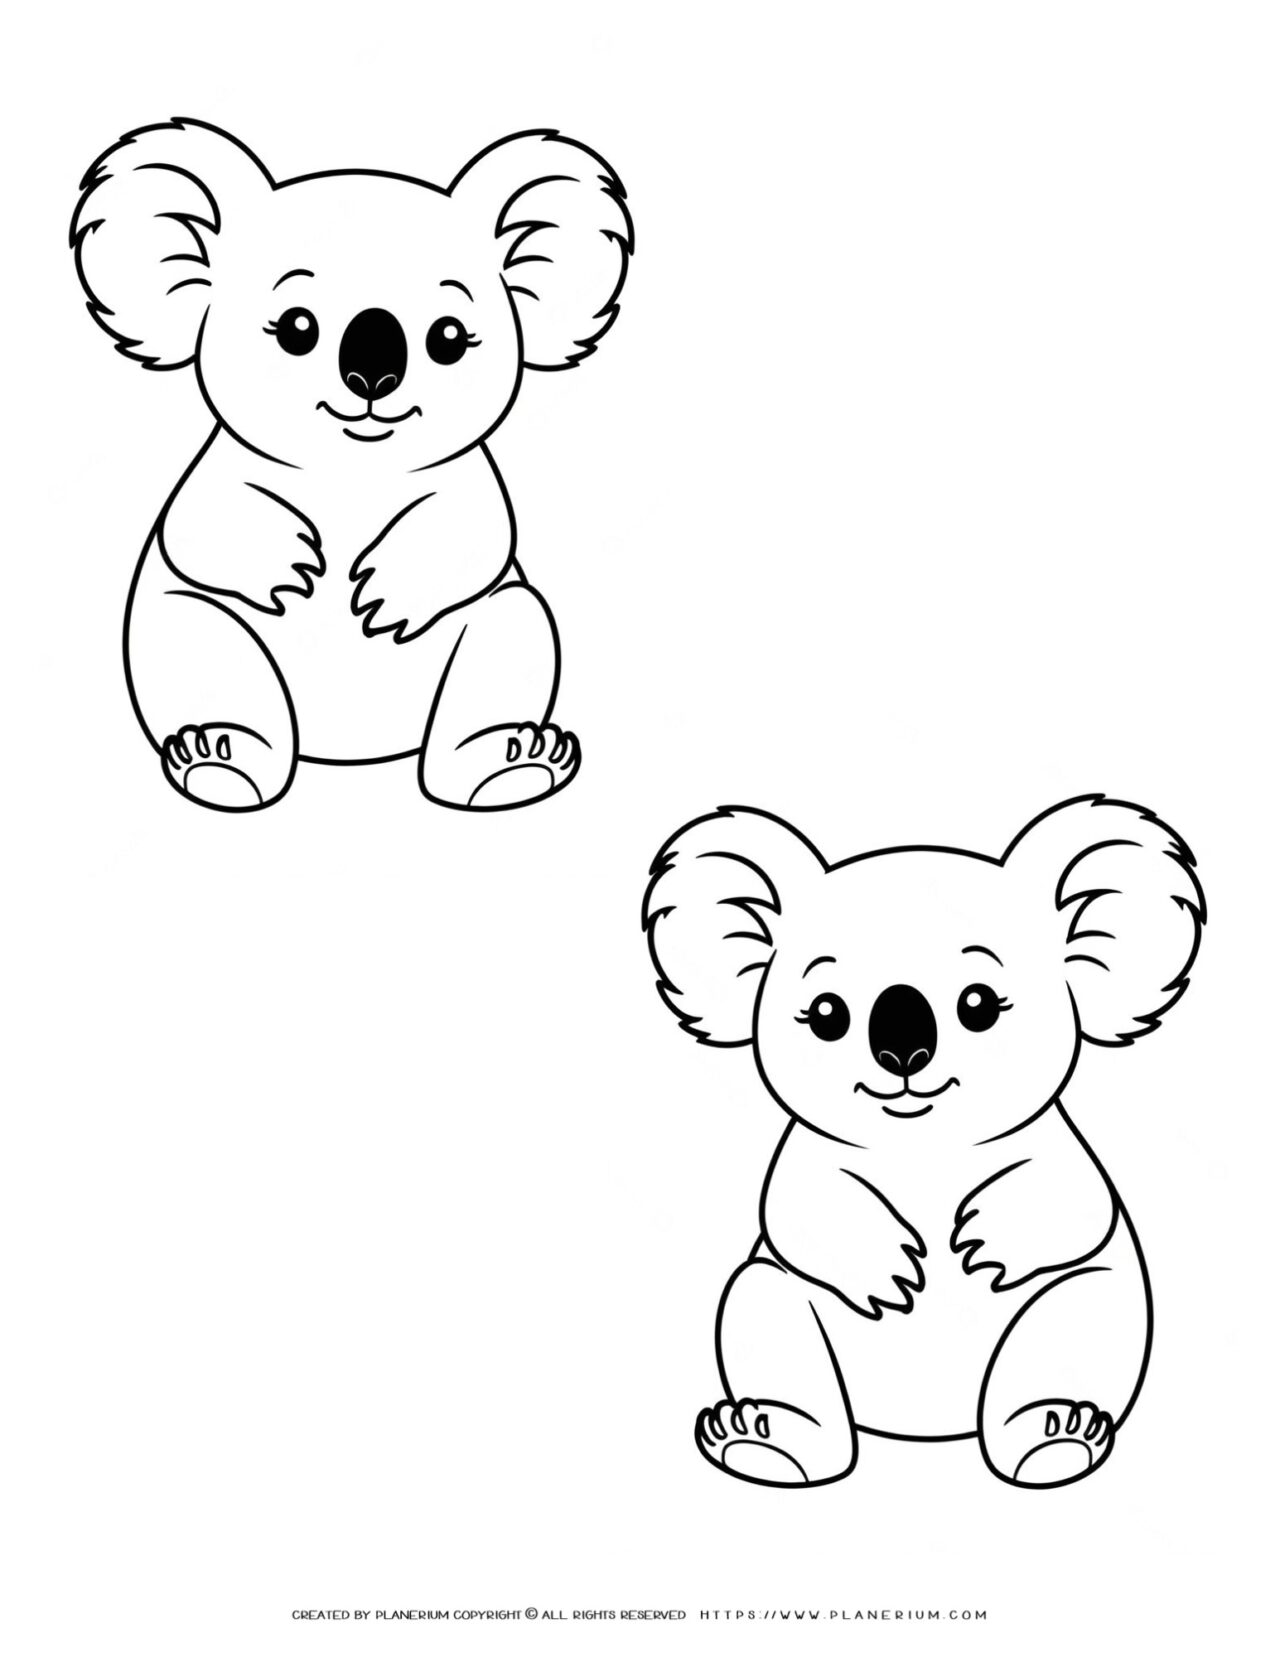 two-koala-outlines-coloring-page-for-kids